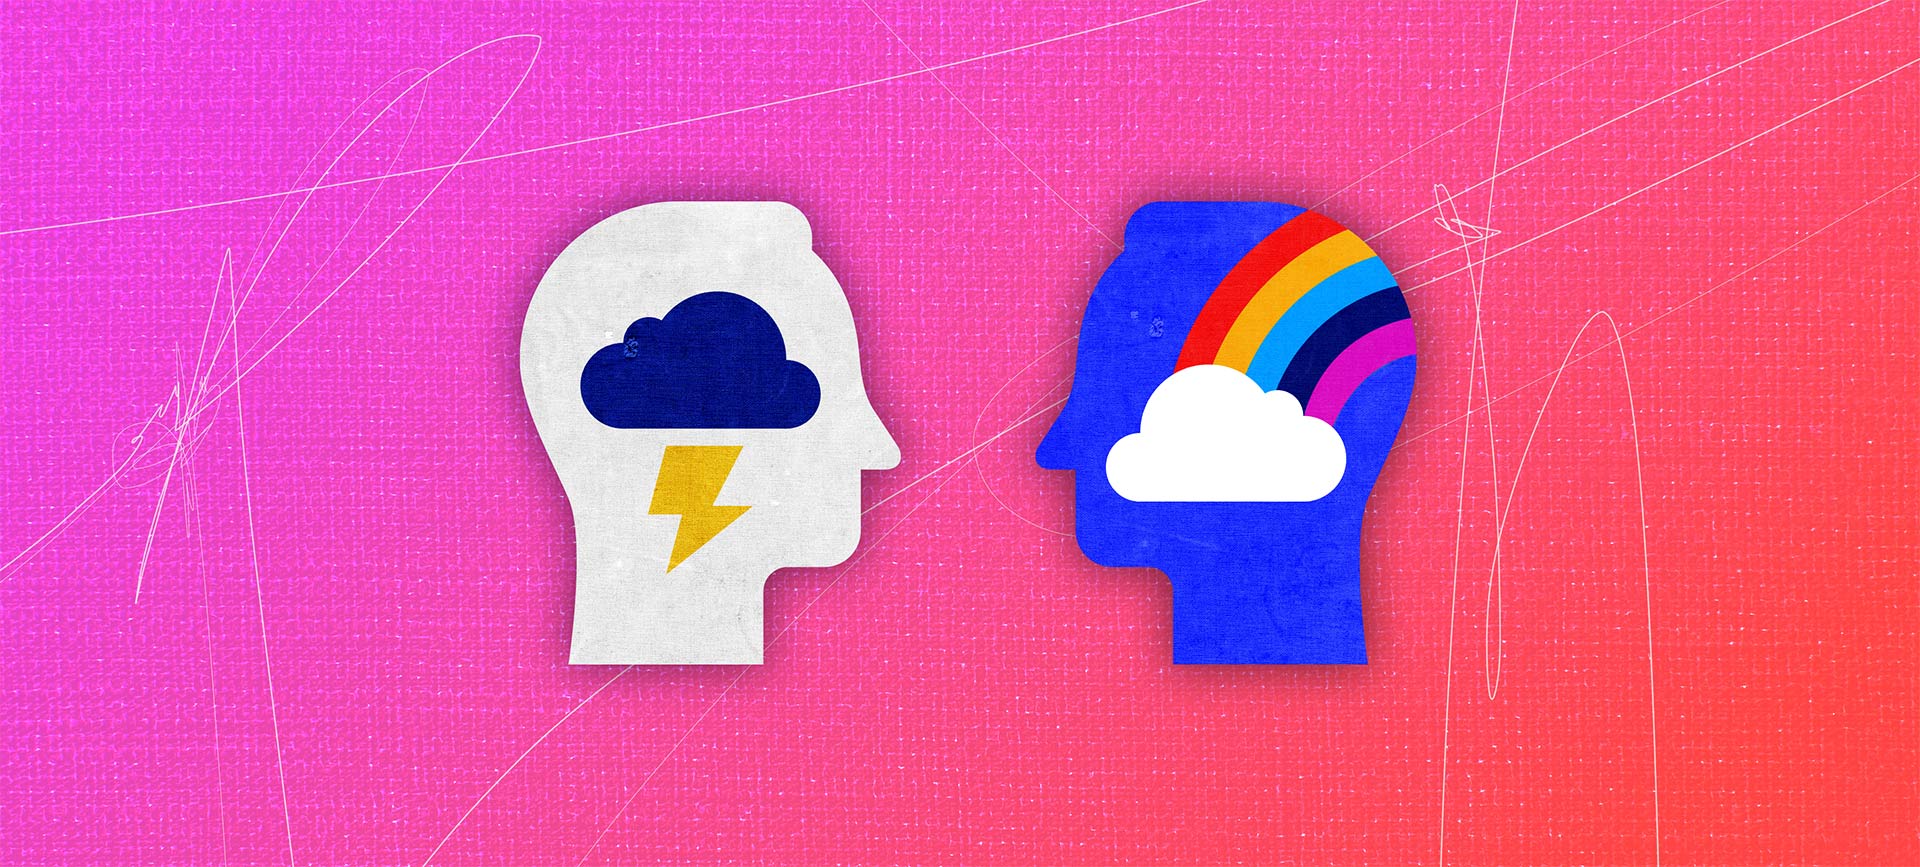 A head with a lightening bolt and cloud inside of it faces another head with a rainbow inside of it.